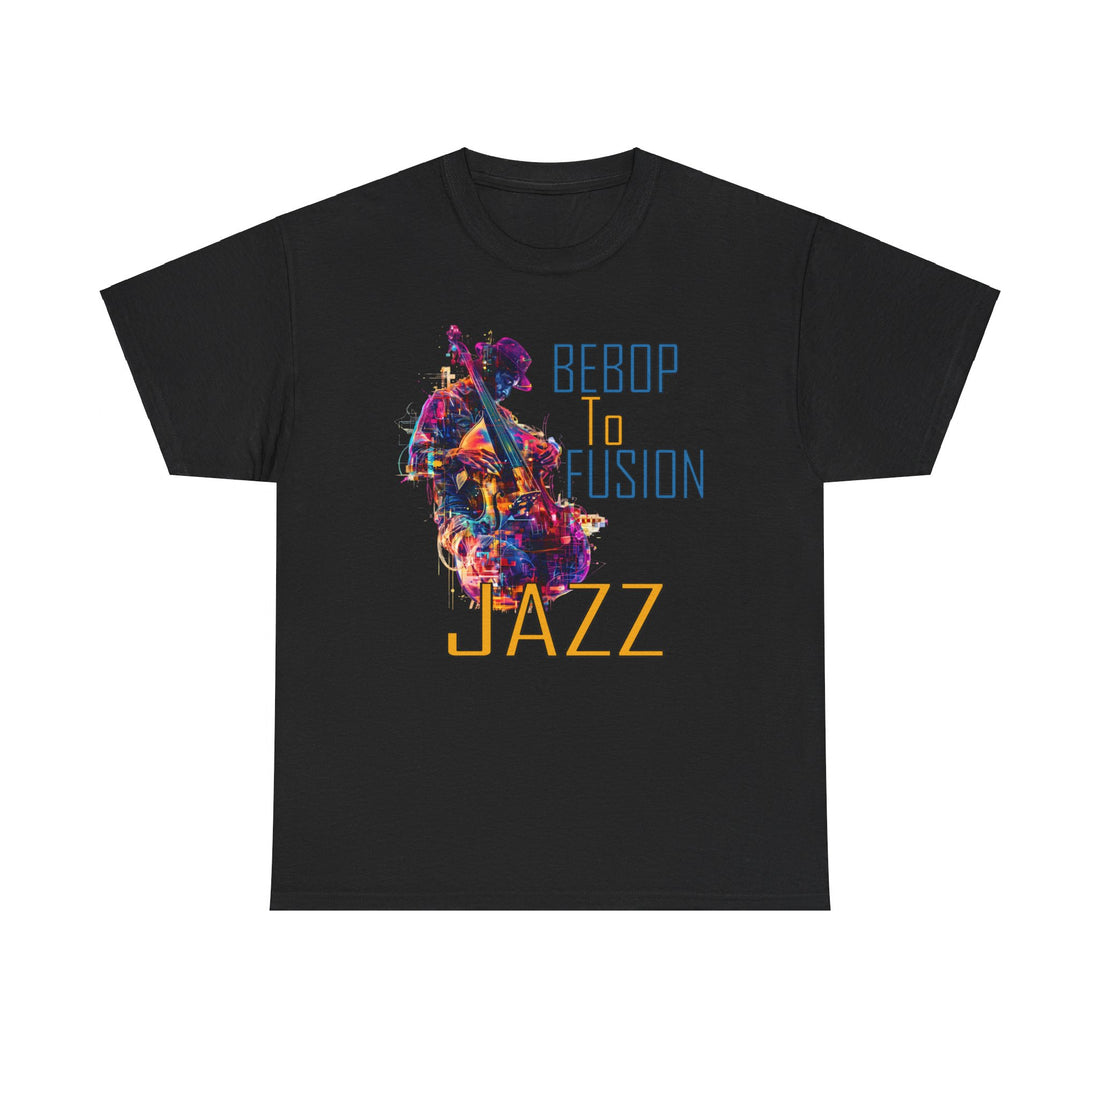 A black or white t shirt with an upright bass player image. The text states ‘From Bebop to Fusion, Jazz’